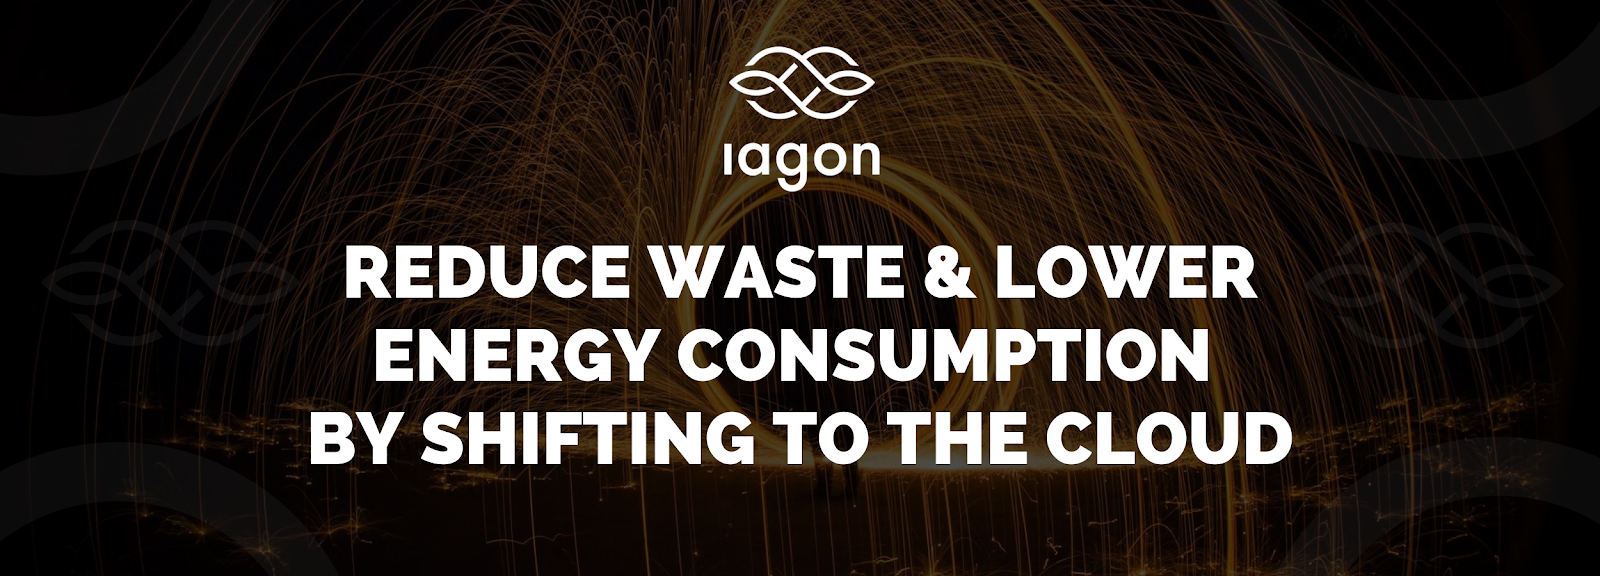 Reduce Waste & Lower Energy Consumption by Shifting to the Cloud